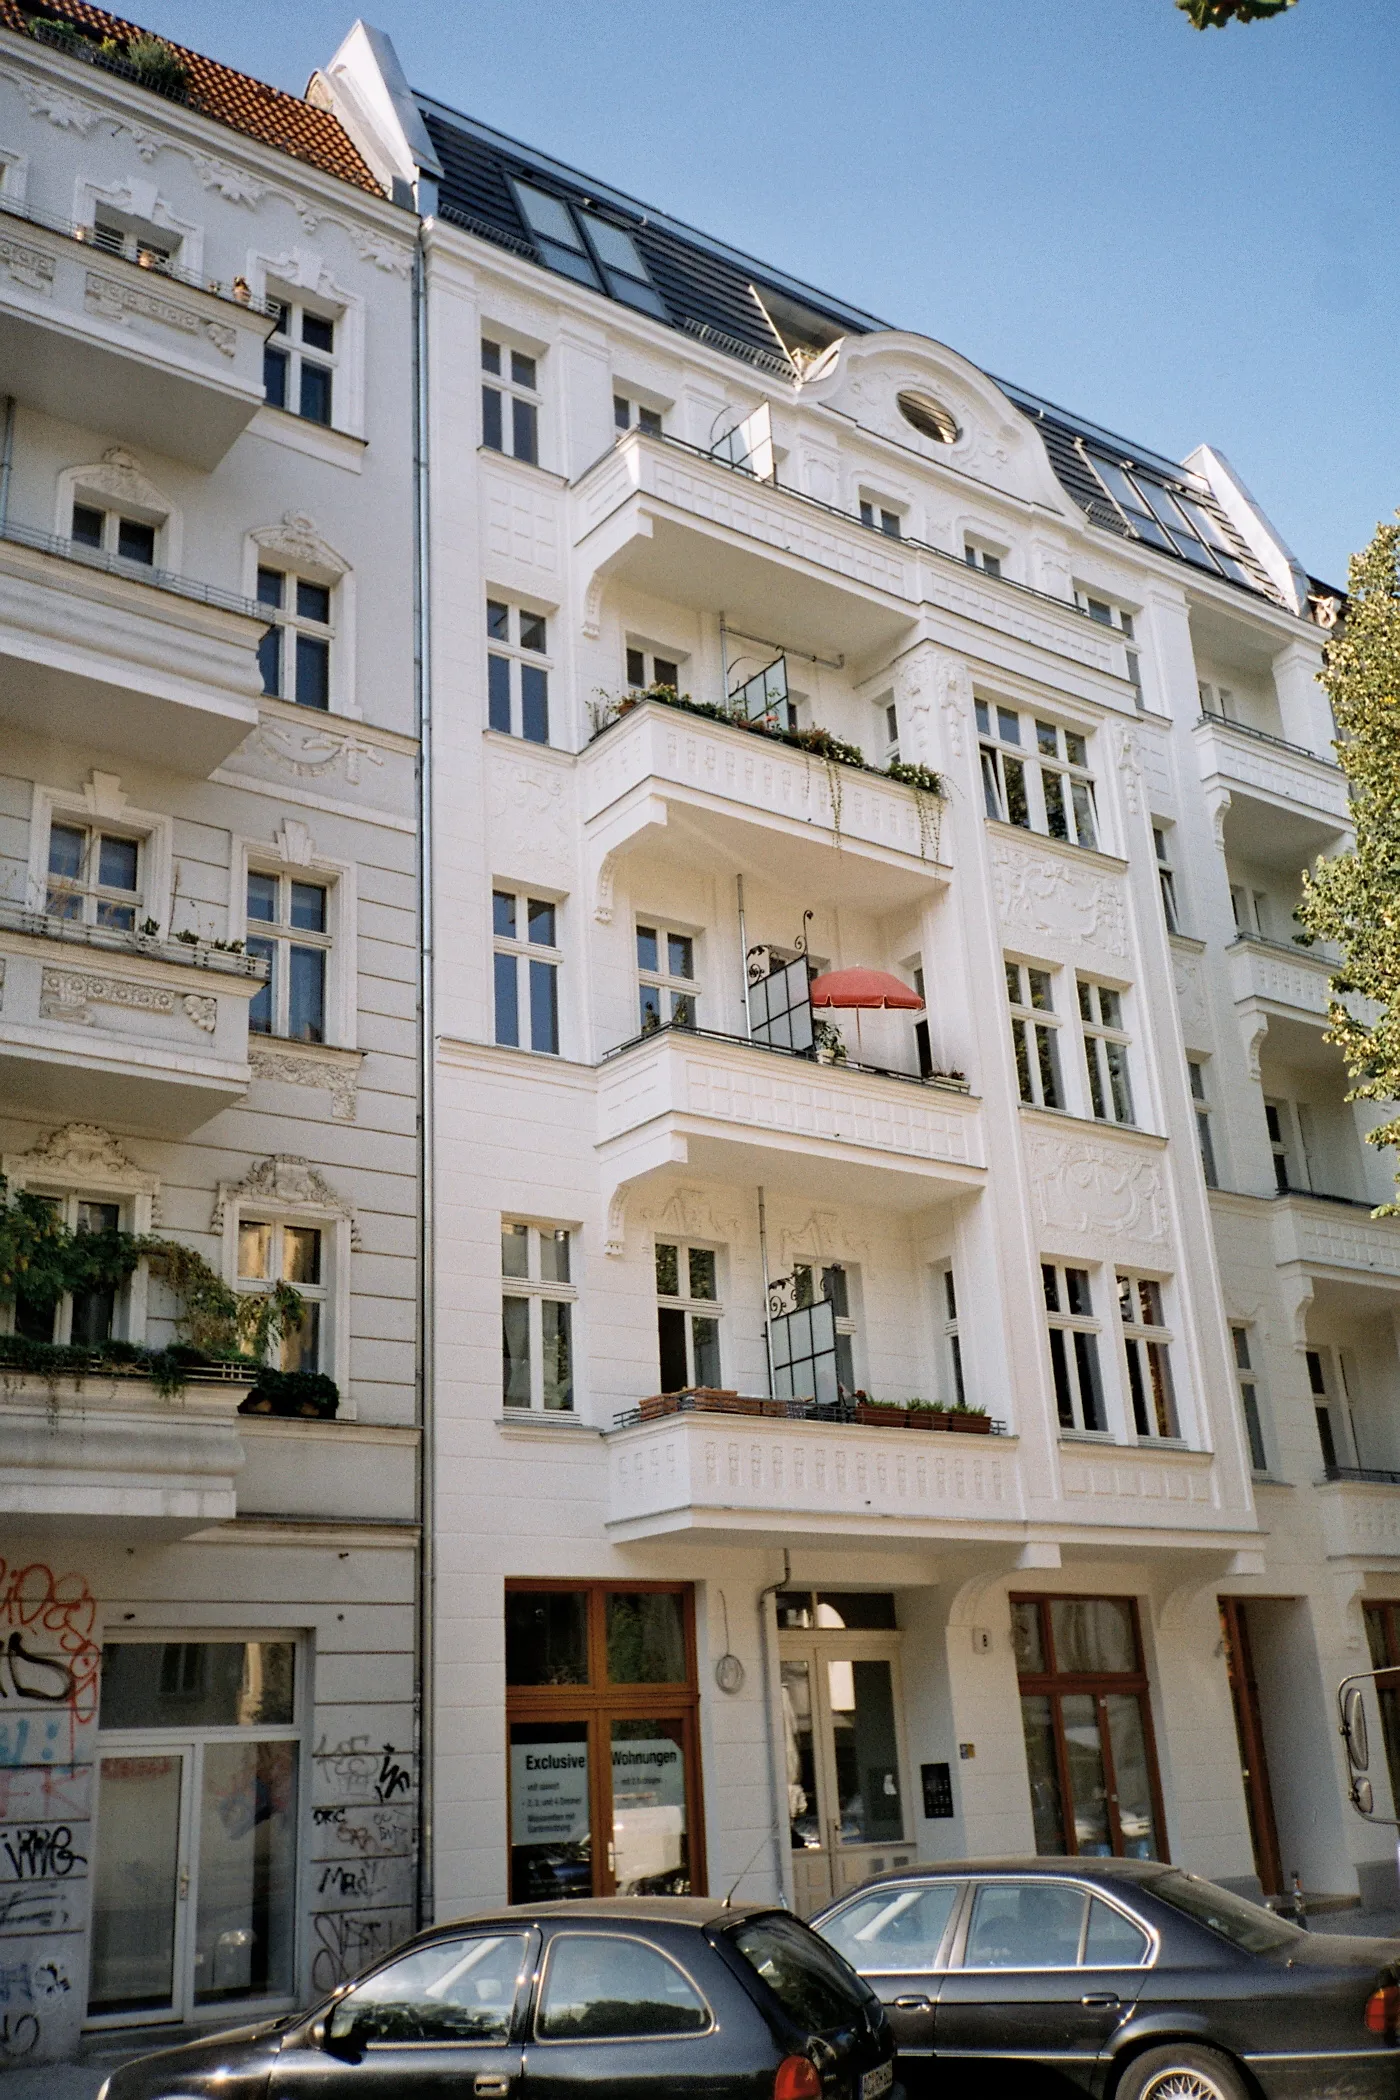 Photo showing: Description: Renovated Jugendstil buildings at Simon-Dach-Straße in Berlin-Friedrichshain.

Source: self-made. I release it into the public domain.